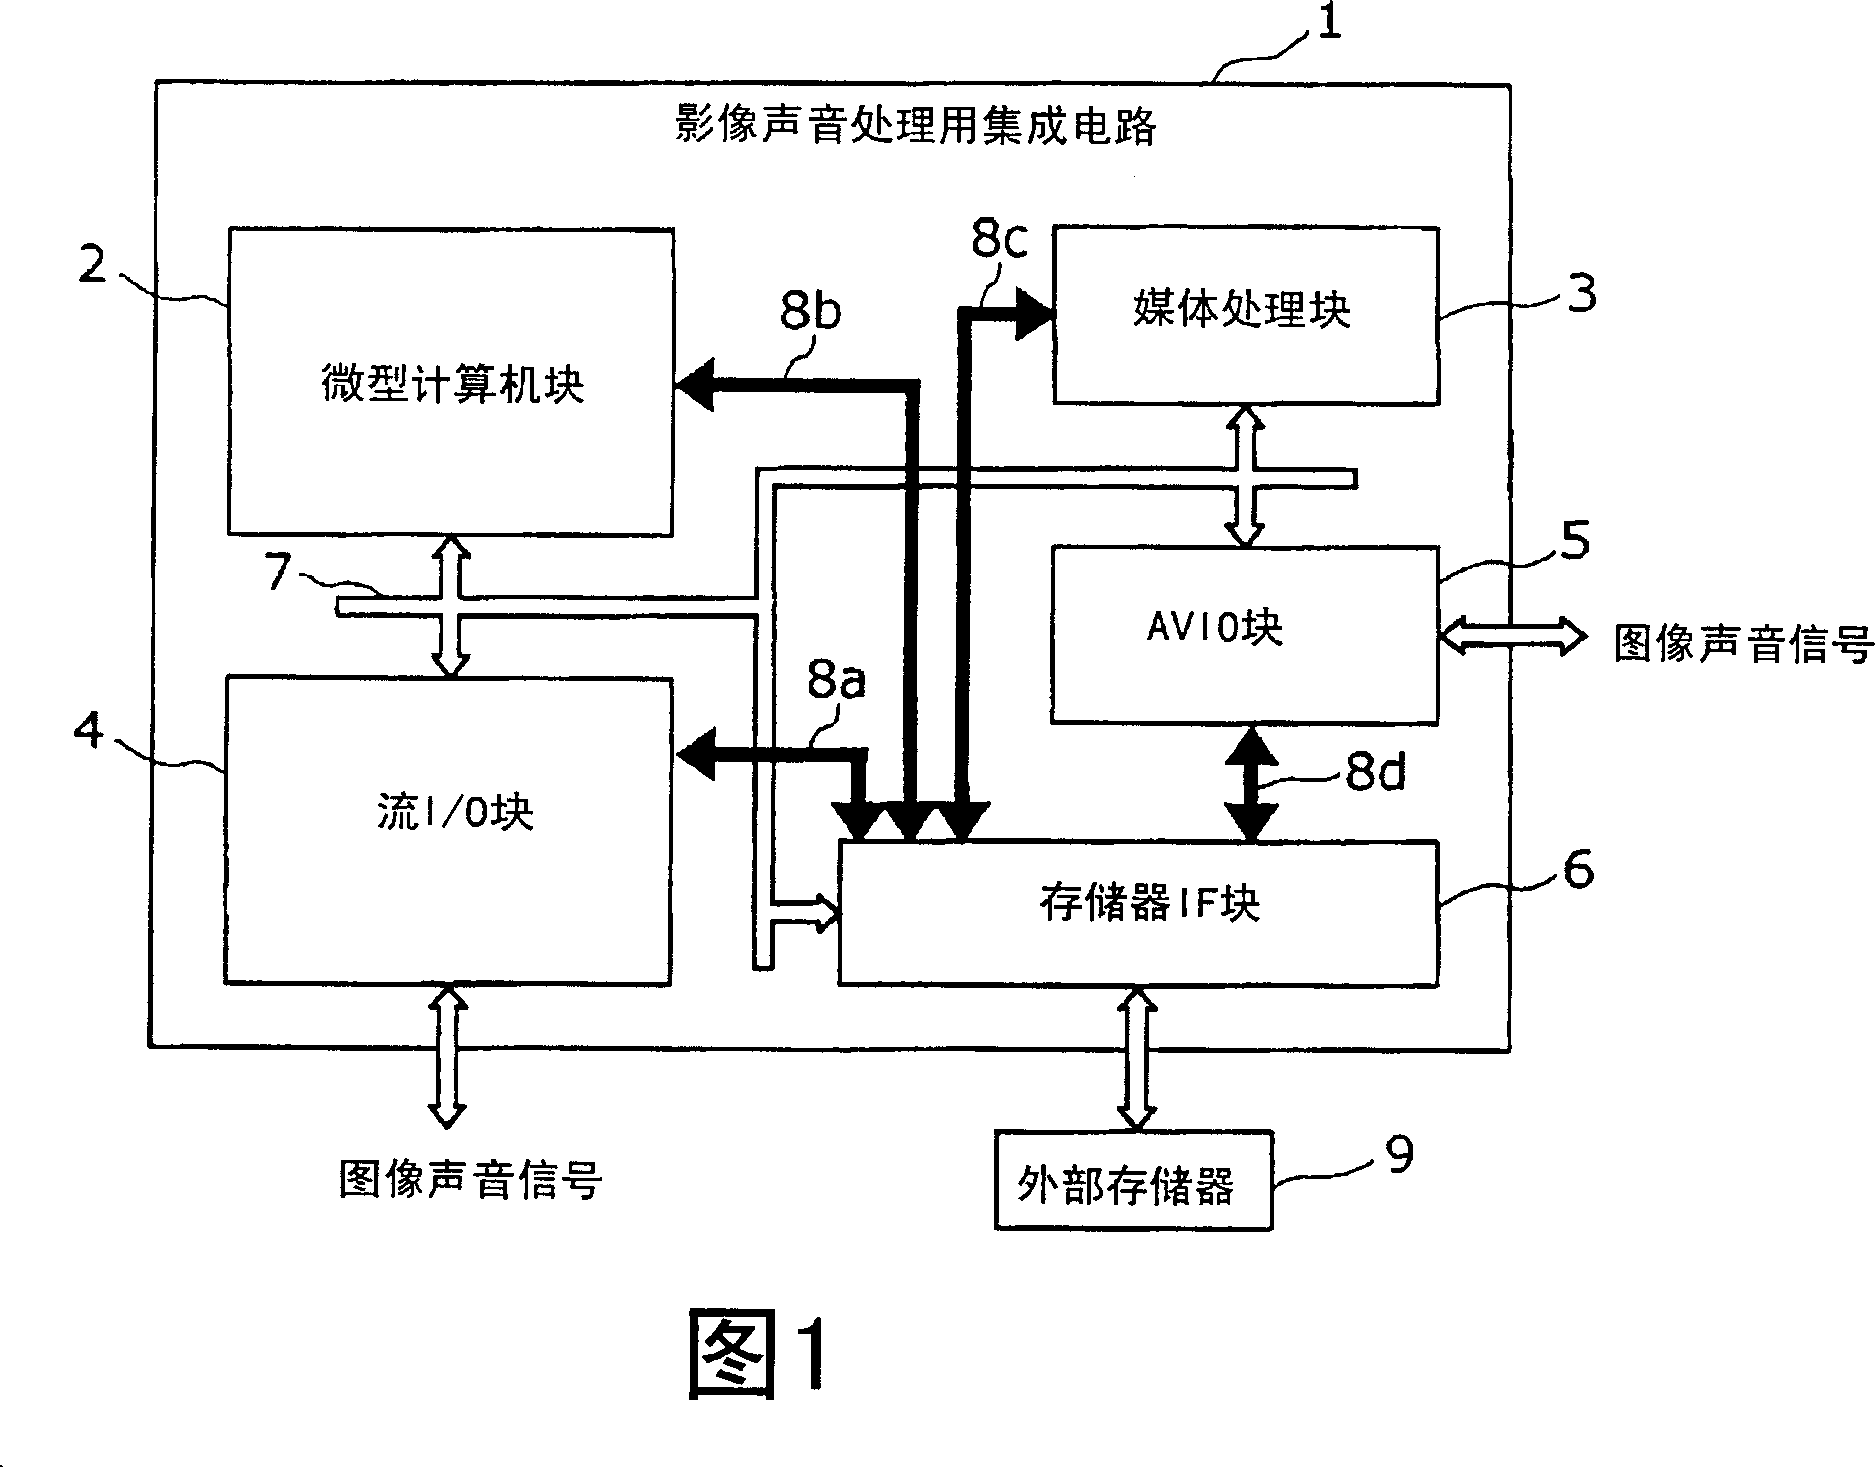 Integrated circuit for video/audio processing